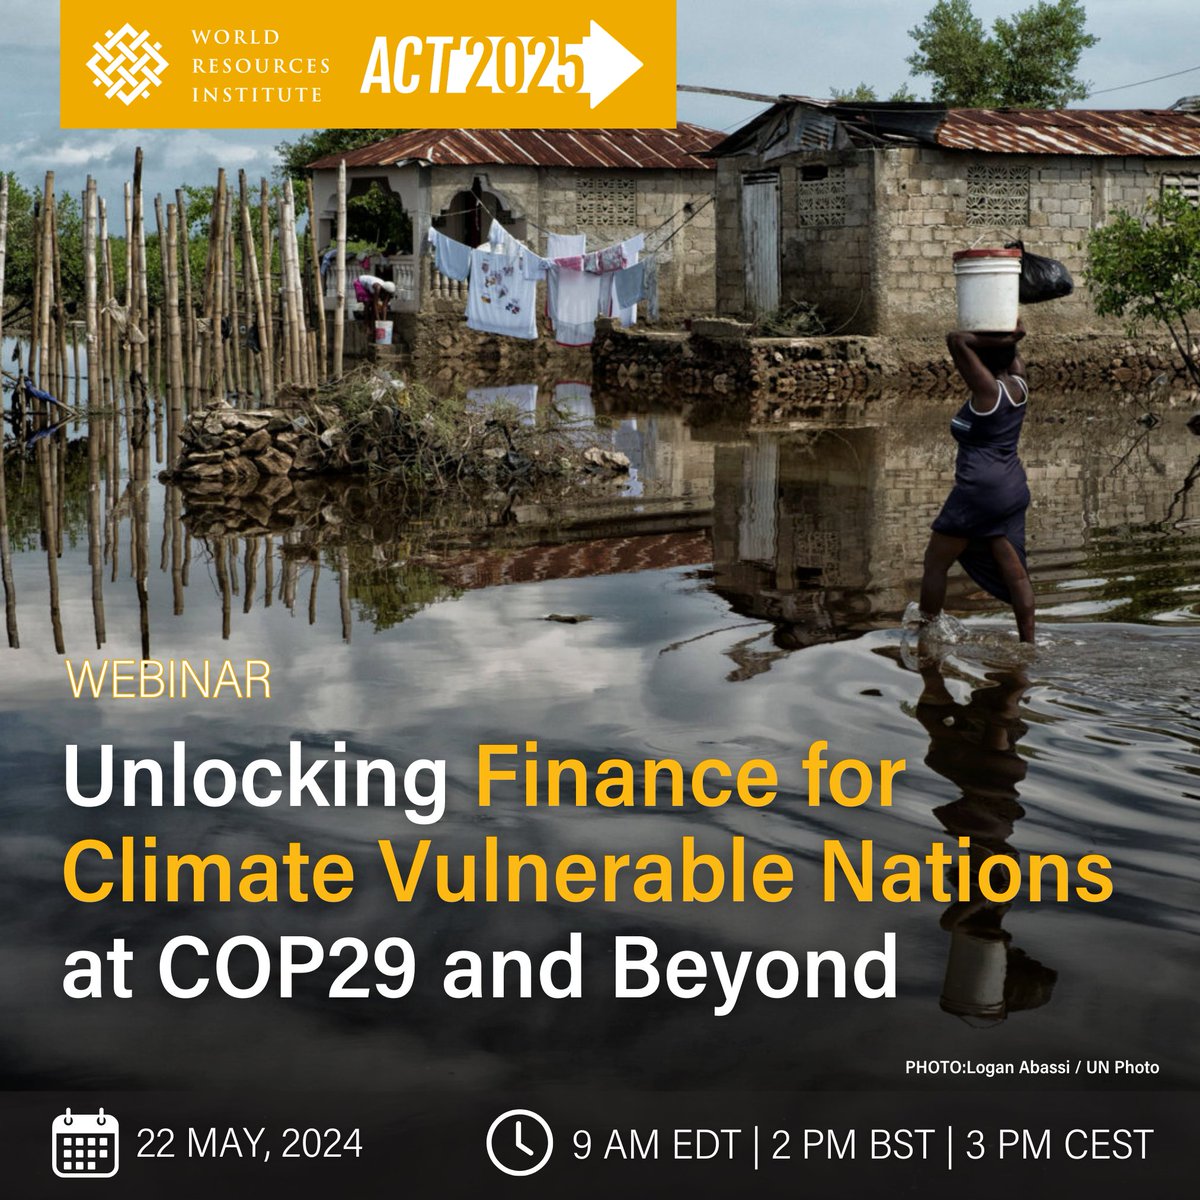 On May 22, join #ACT2025  and a distinguished panel for a high-level #webinar to discuss  how a new global climate finance goal at #COP29 could meet the needs of climate-vulnerable countries. 

📋Register now: bit.ly/44xDAfx